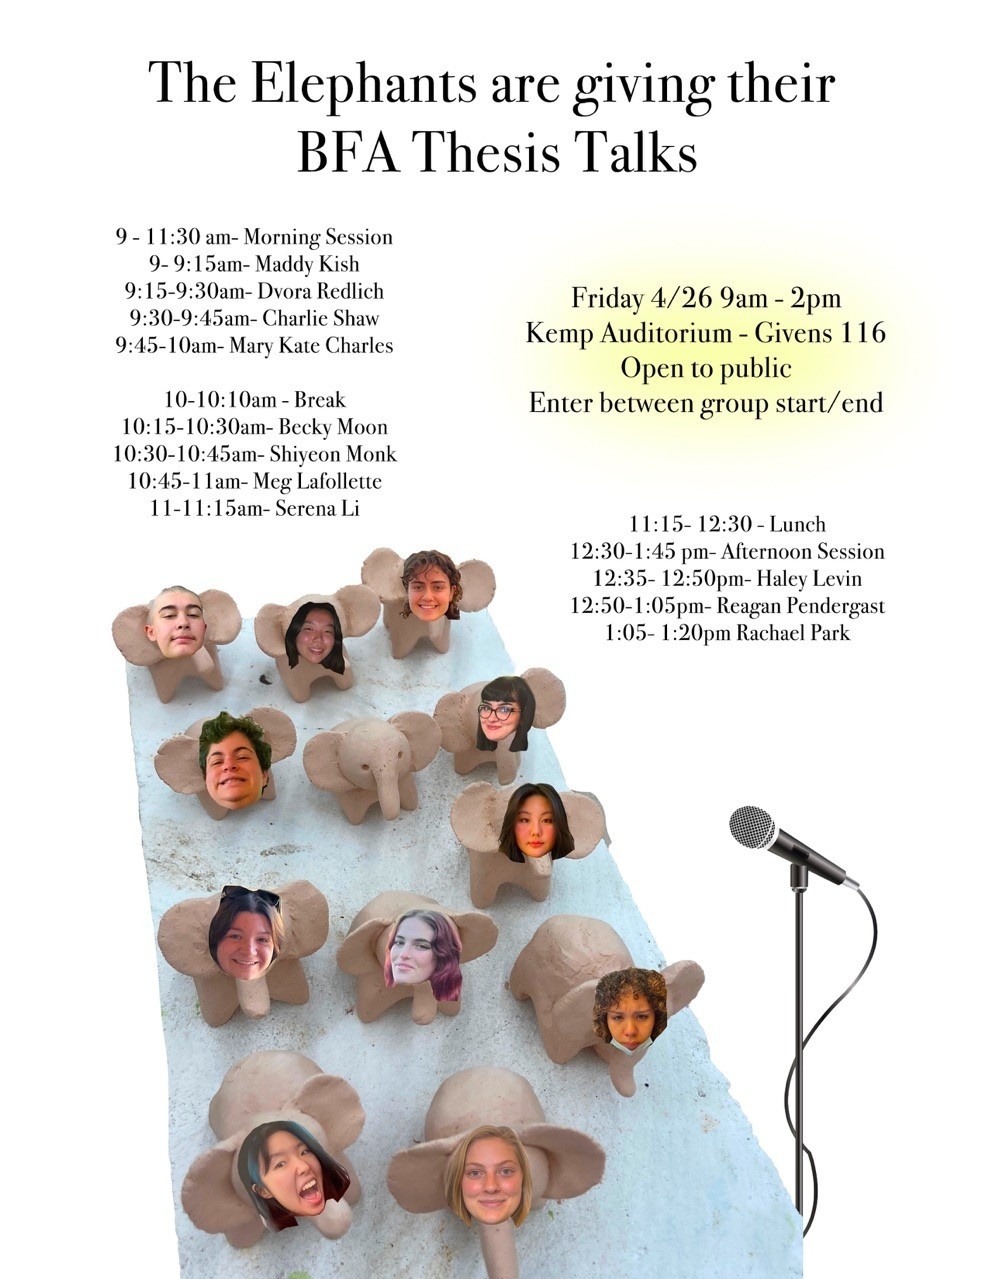 flyer with text: The Elephants are giving their BFA Thesis Talks